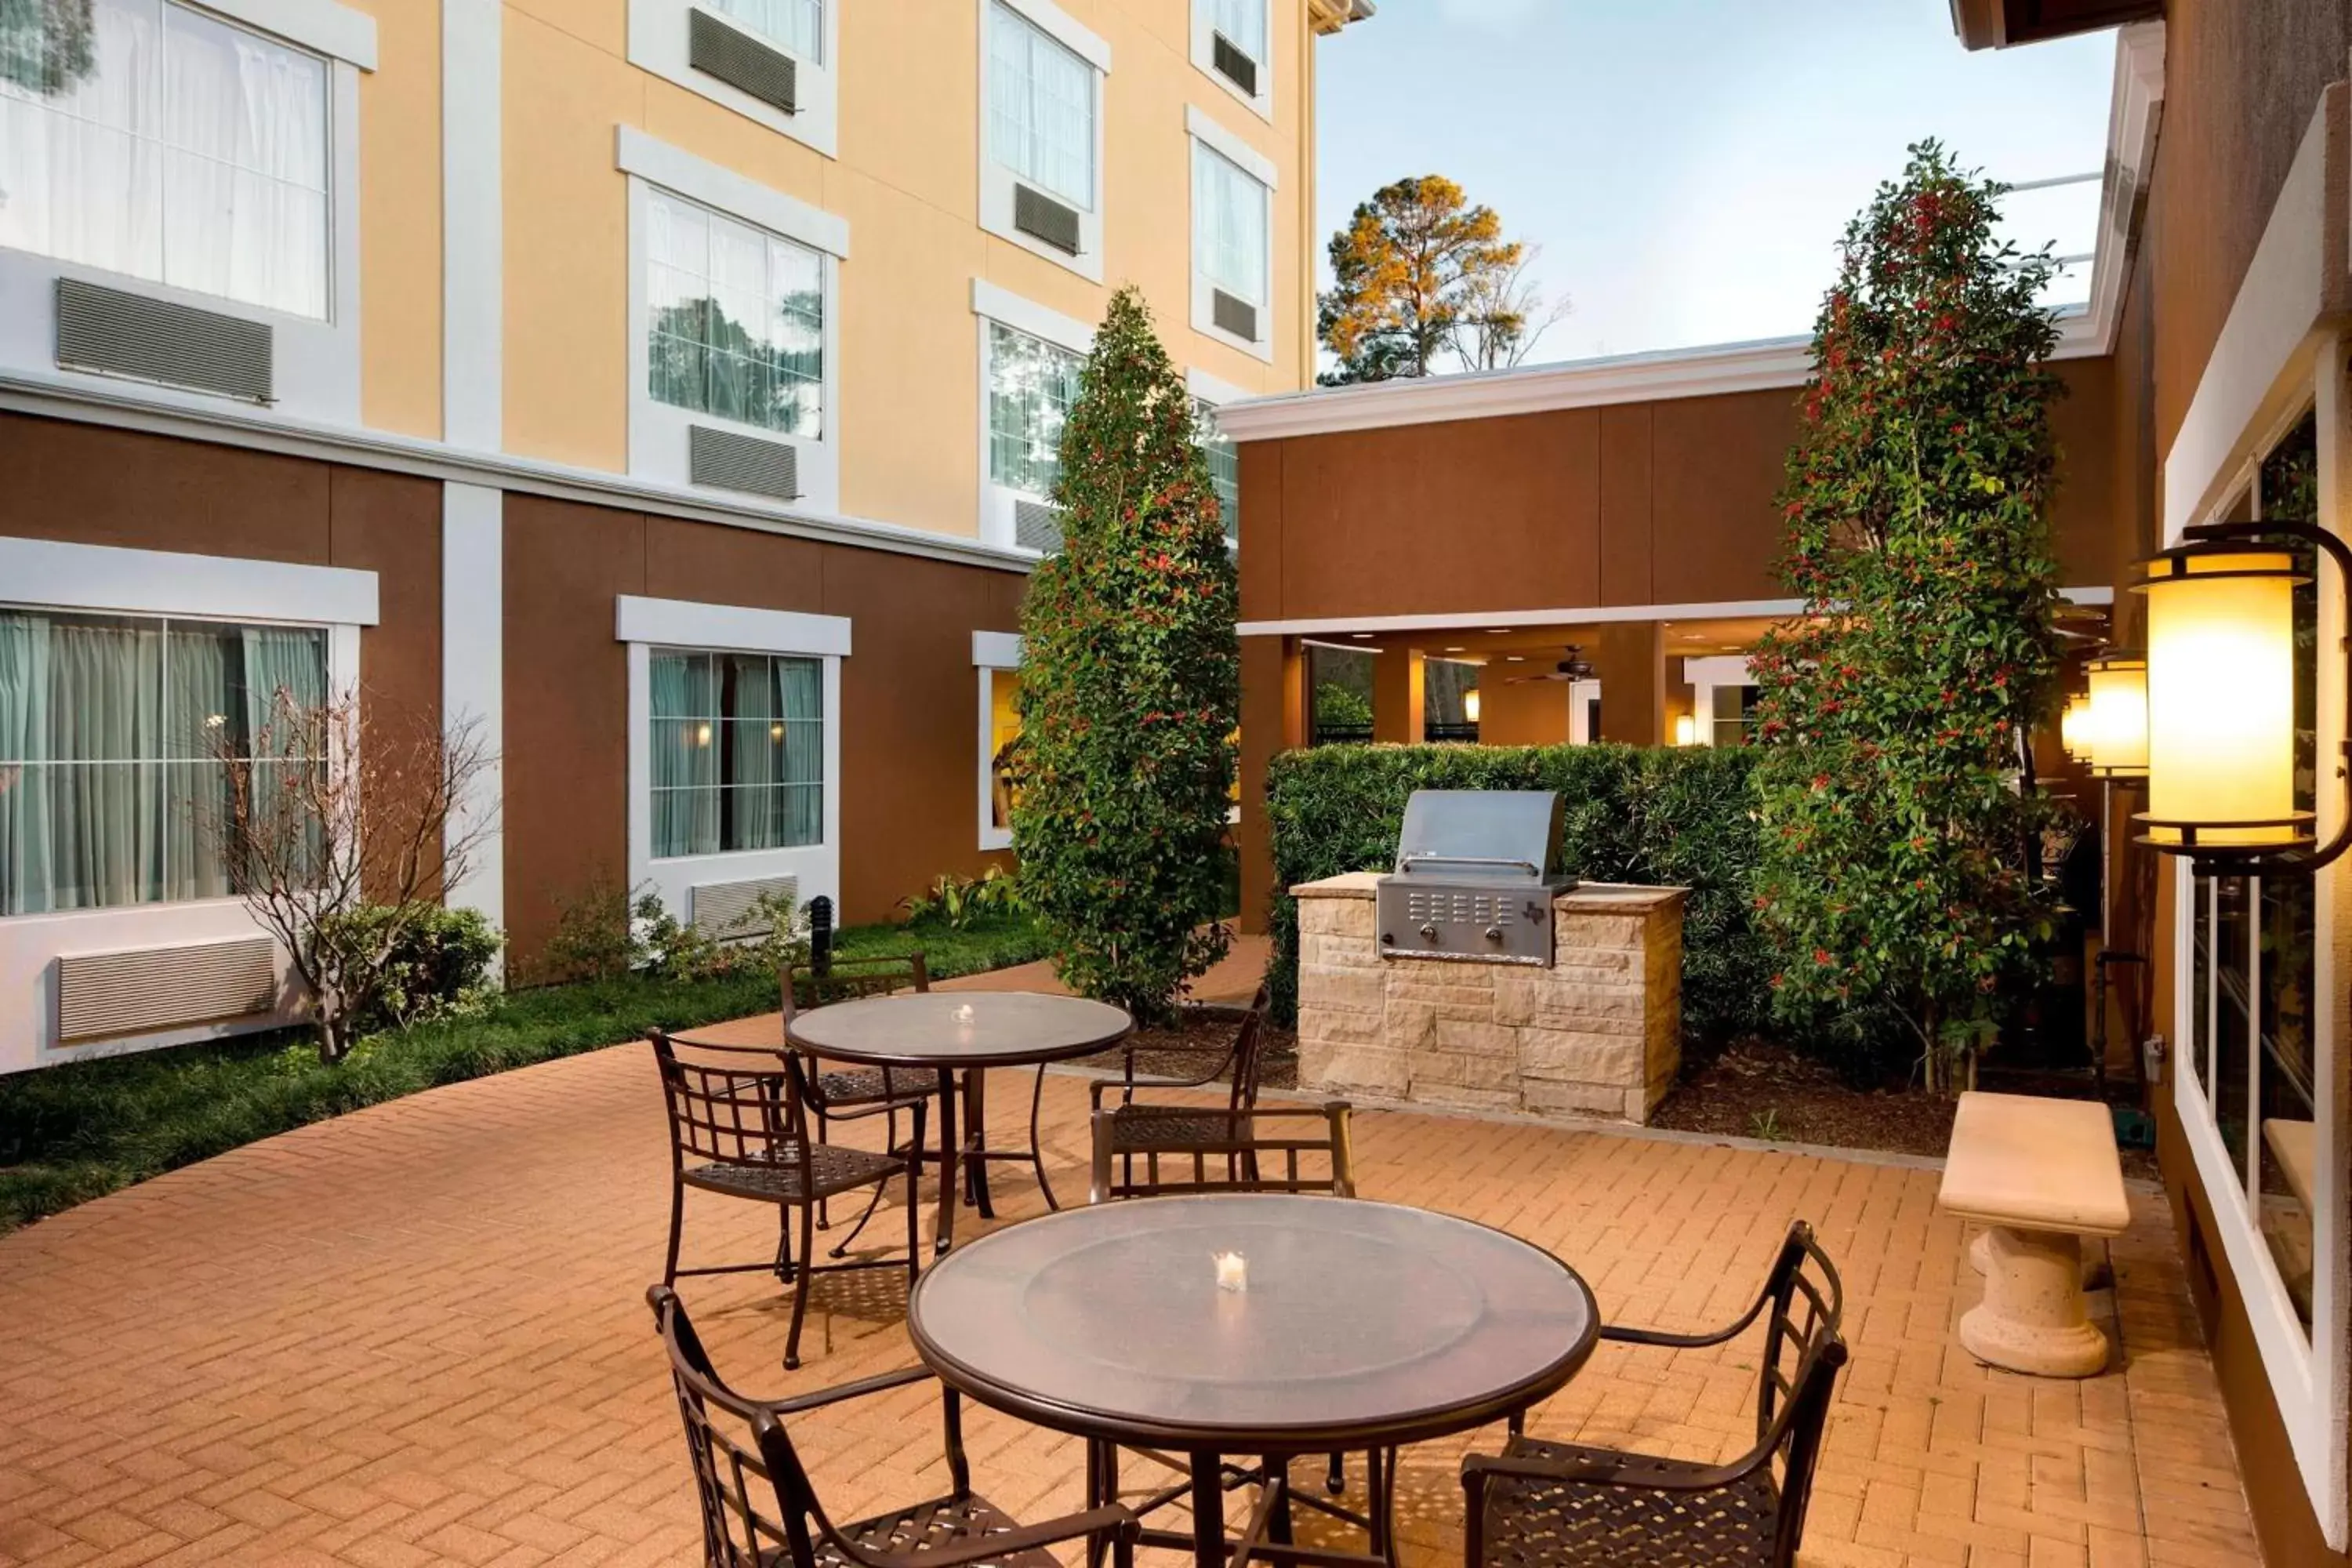 Property building in Fairfield Inn & Suites Houston Intercontinental Airport